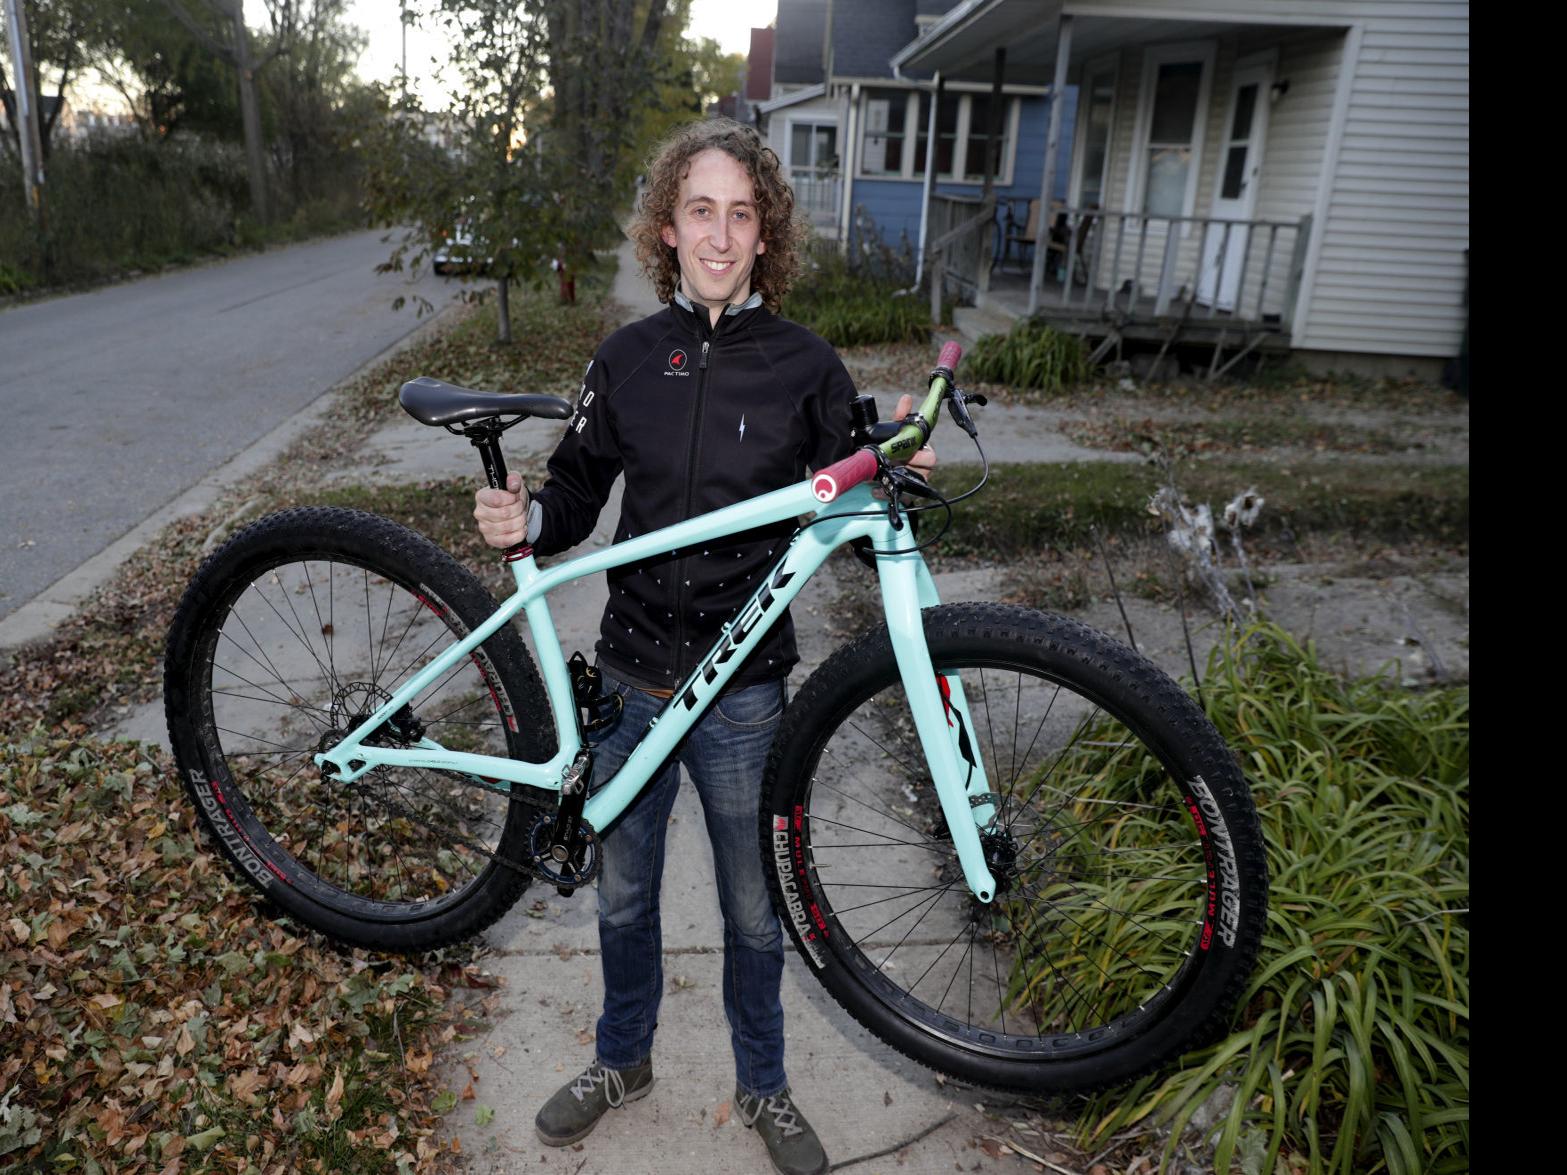 Craigslist A Popular Place To Fence Stolen Bikes And Get Them Back Crime News Madison Com